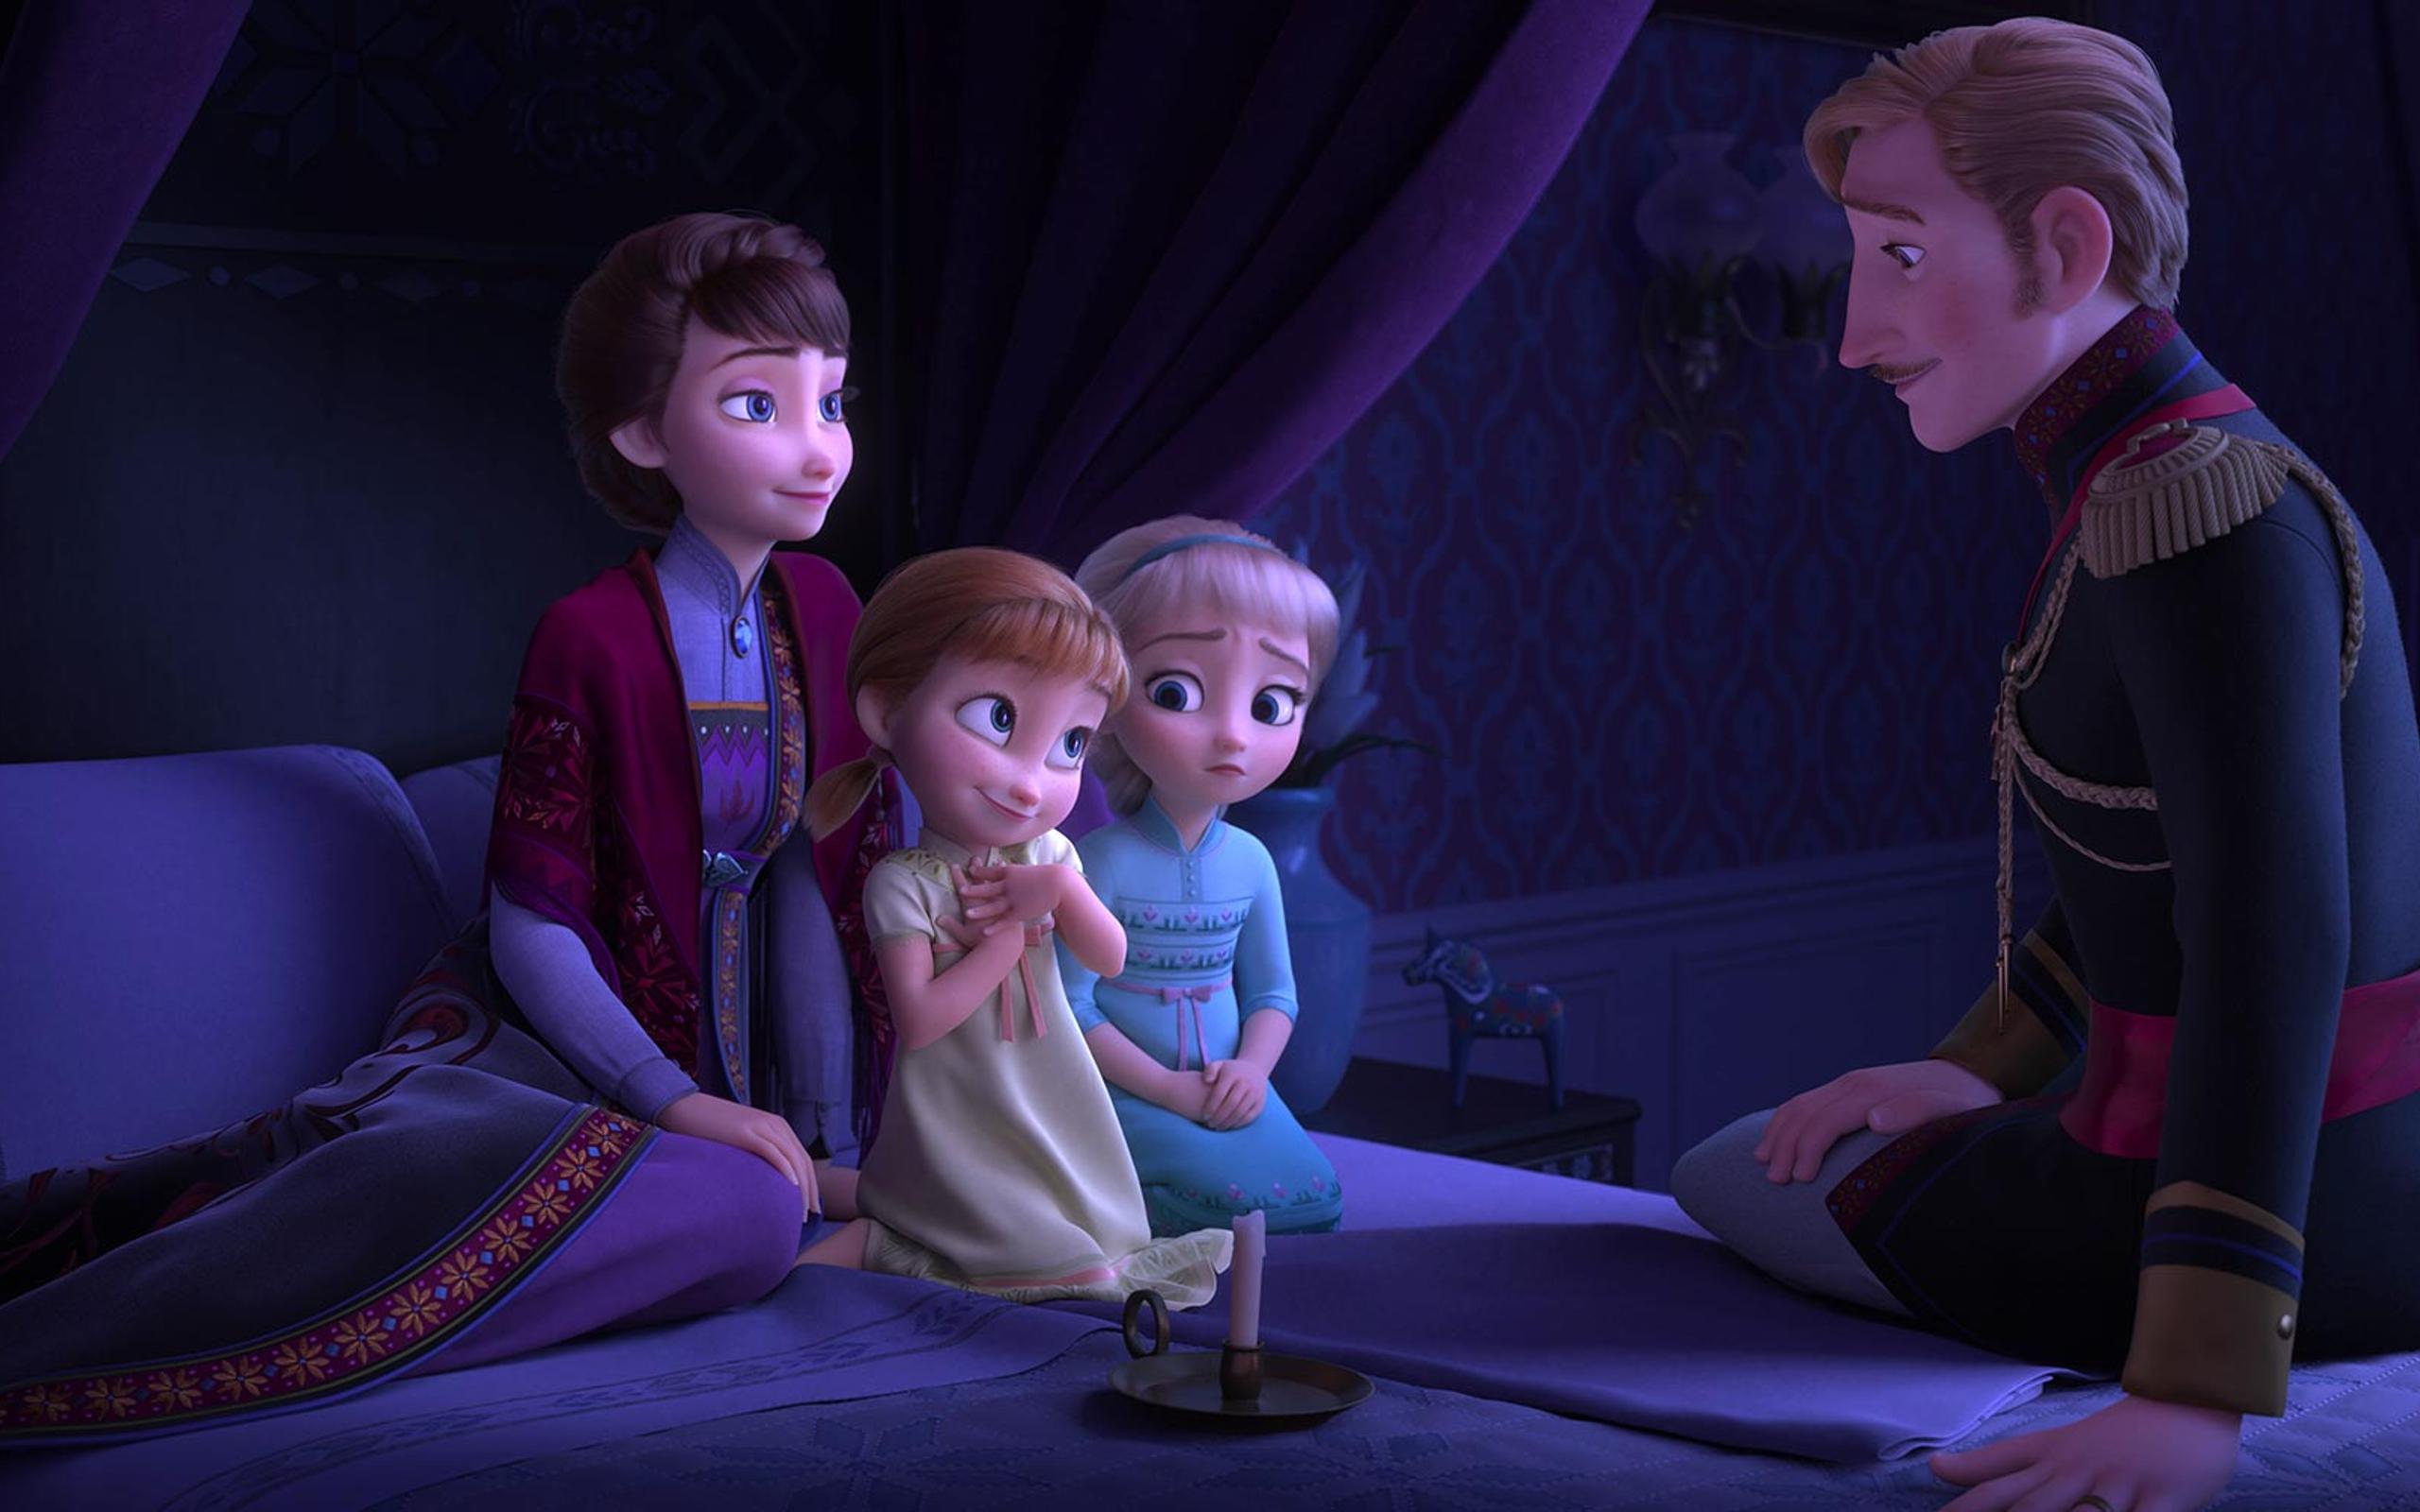 Download Frozen 2 scene - Anna and Elsa with parents 2560x1600.